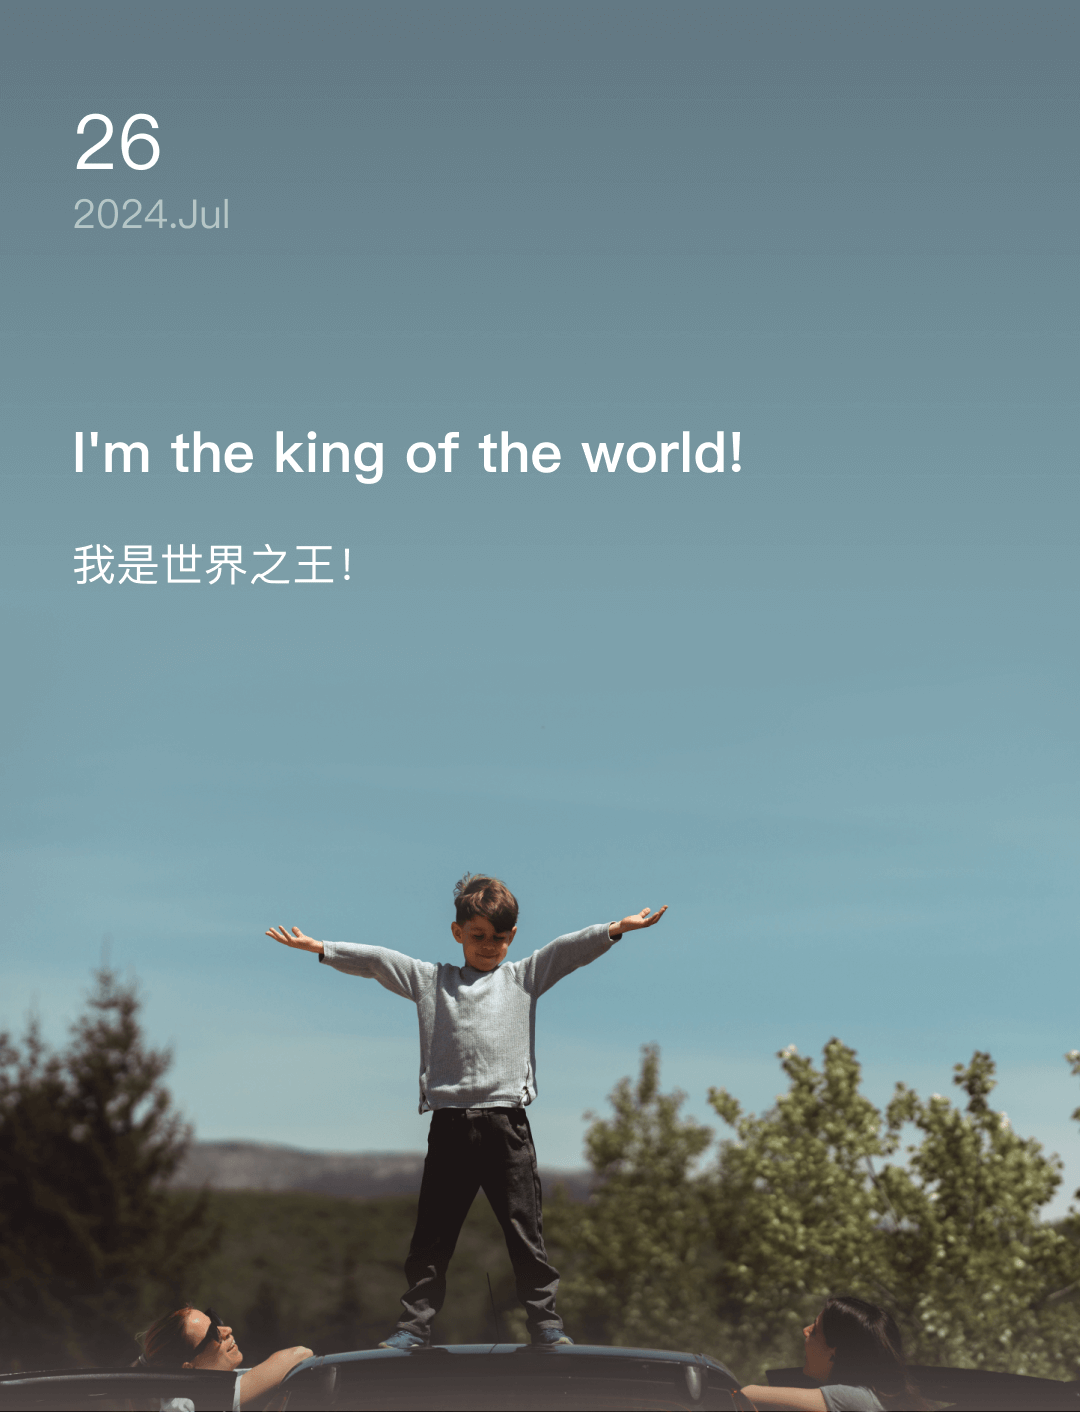 I'm the king of the world!